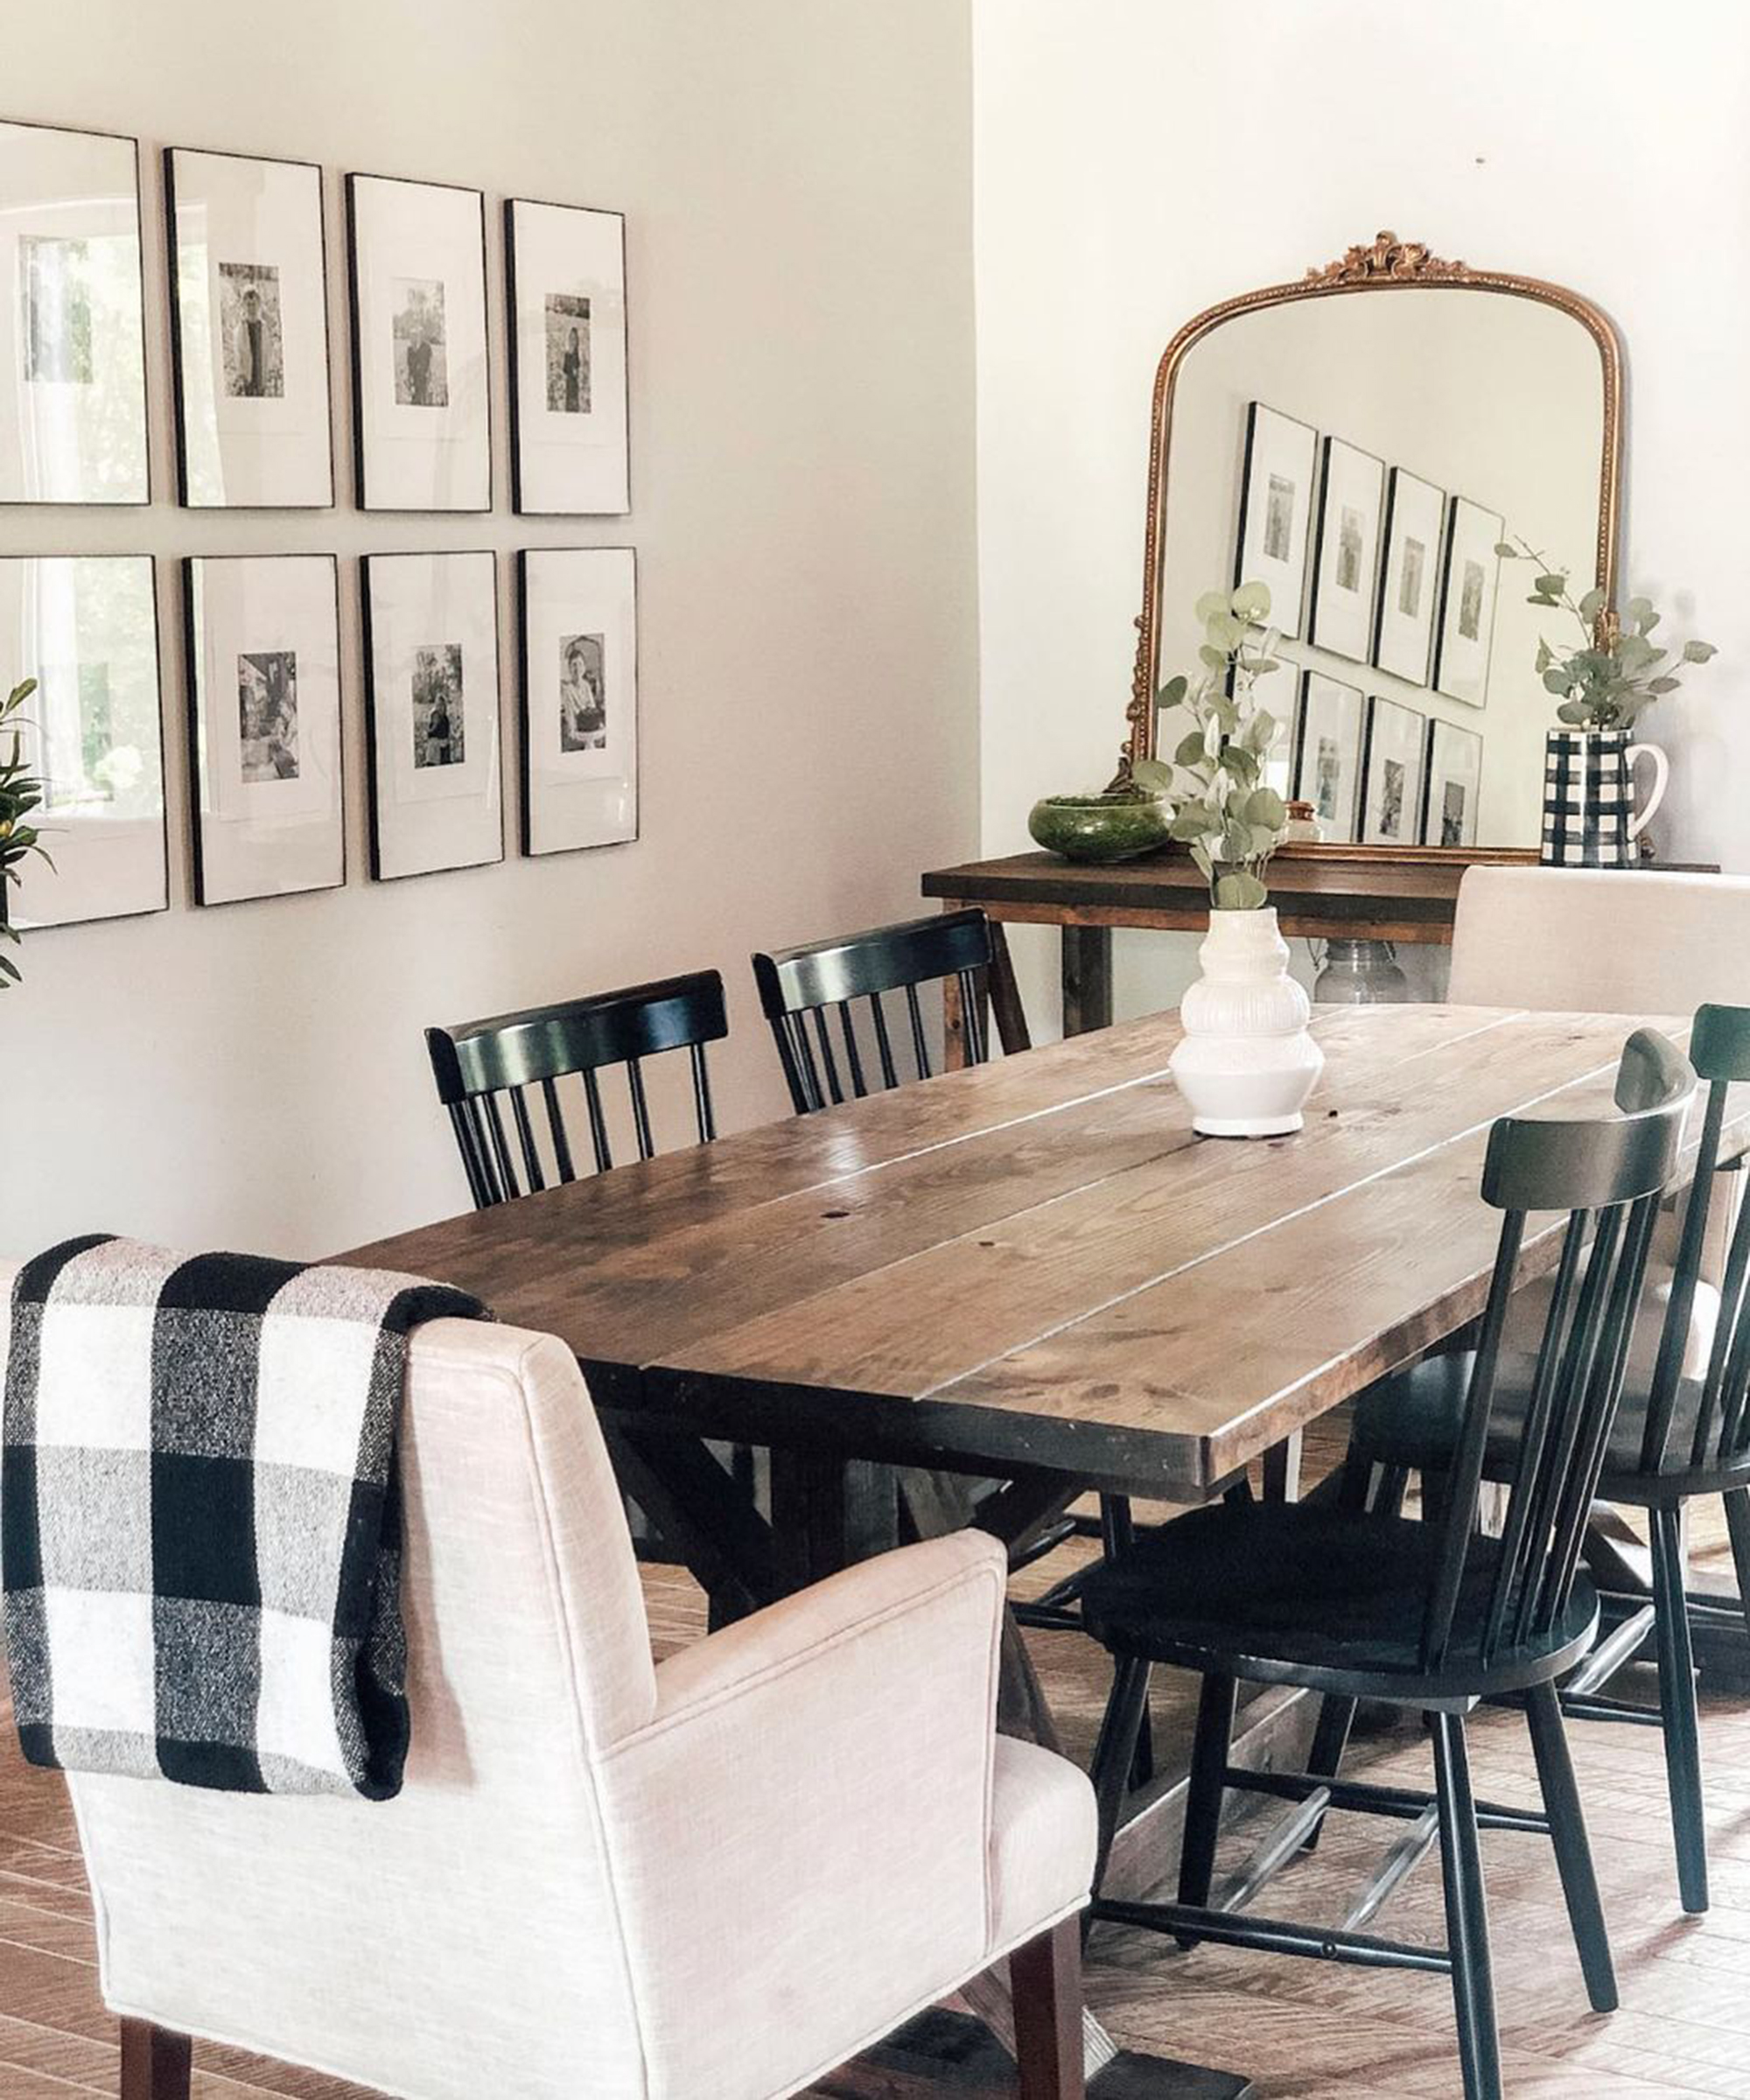 A dining room wall idea with monochrome photographs, black wooden chairs, plaid accessories and large mirror